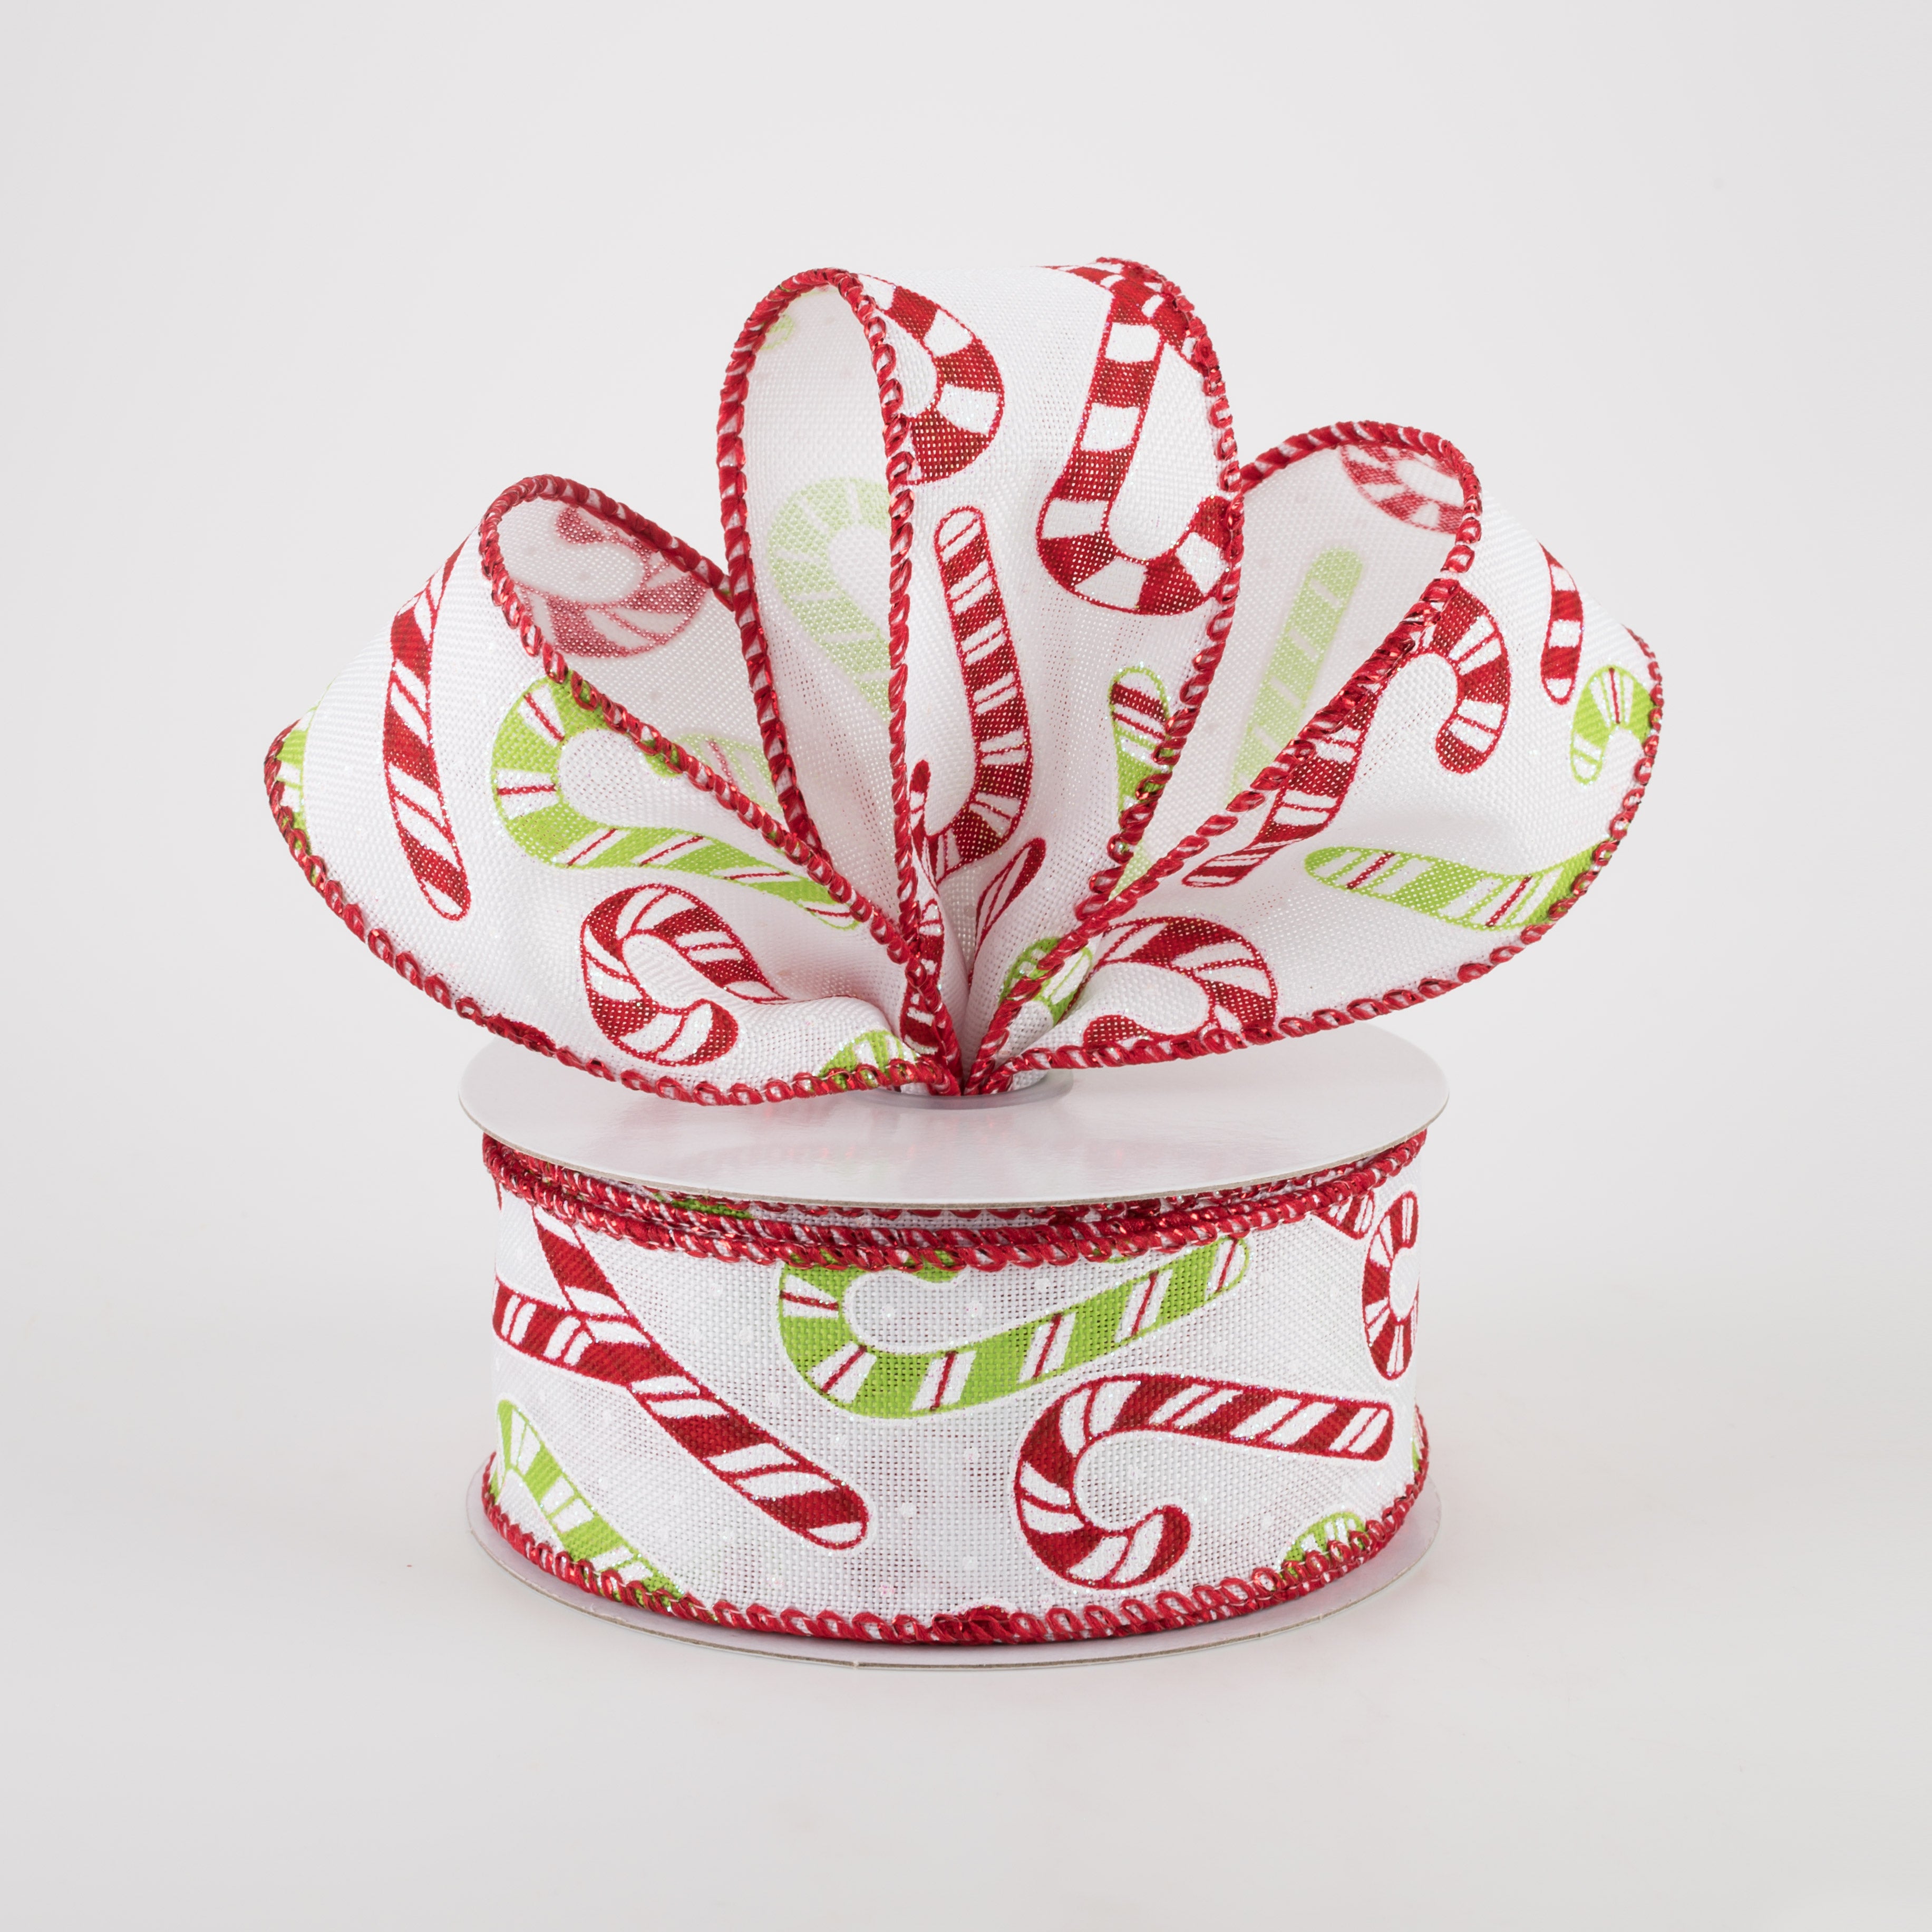 1.5" Linen Iridescent Candy Cane Ribbon: White, Red, Lime (10 Yards)